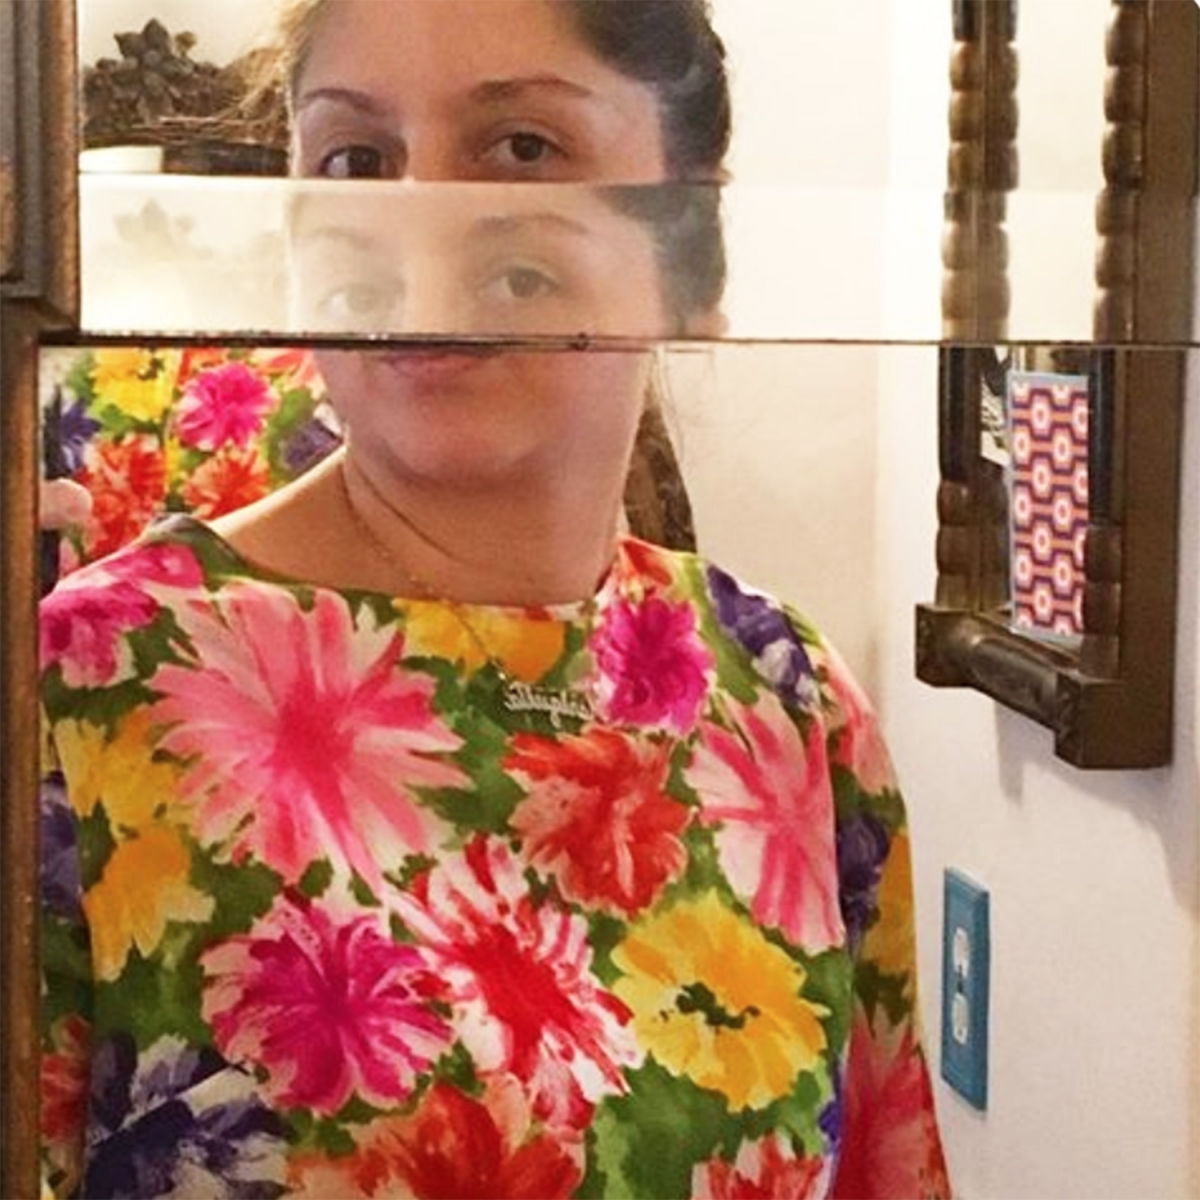 Image shows a photographic portrait of TCP 30-1 featured artist Micki Davis. It is a self-taken photo in front of a mirror, which has distorted Micki's face so that she appears to have two sets of eyes. She wears a flower-print shirt with pink, red, and yellow flowers